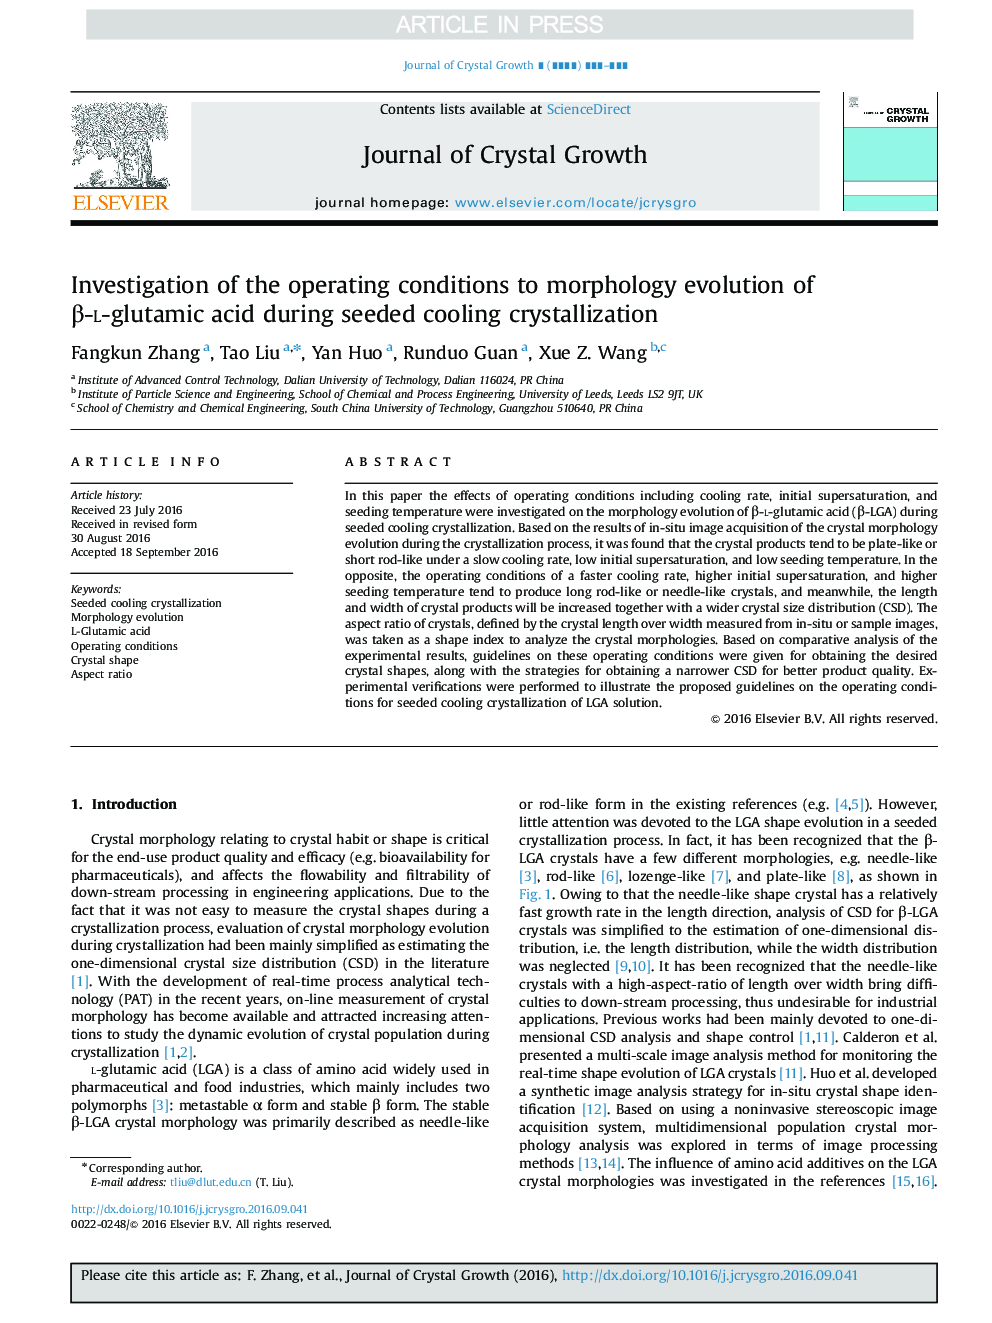 Investigation of the operating conditions to morphology evolution of Î²-l-glutamic acid during seeded cooling crystallization